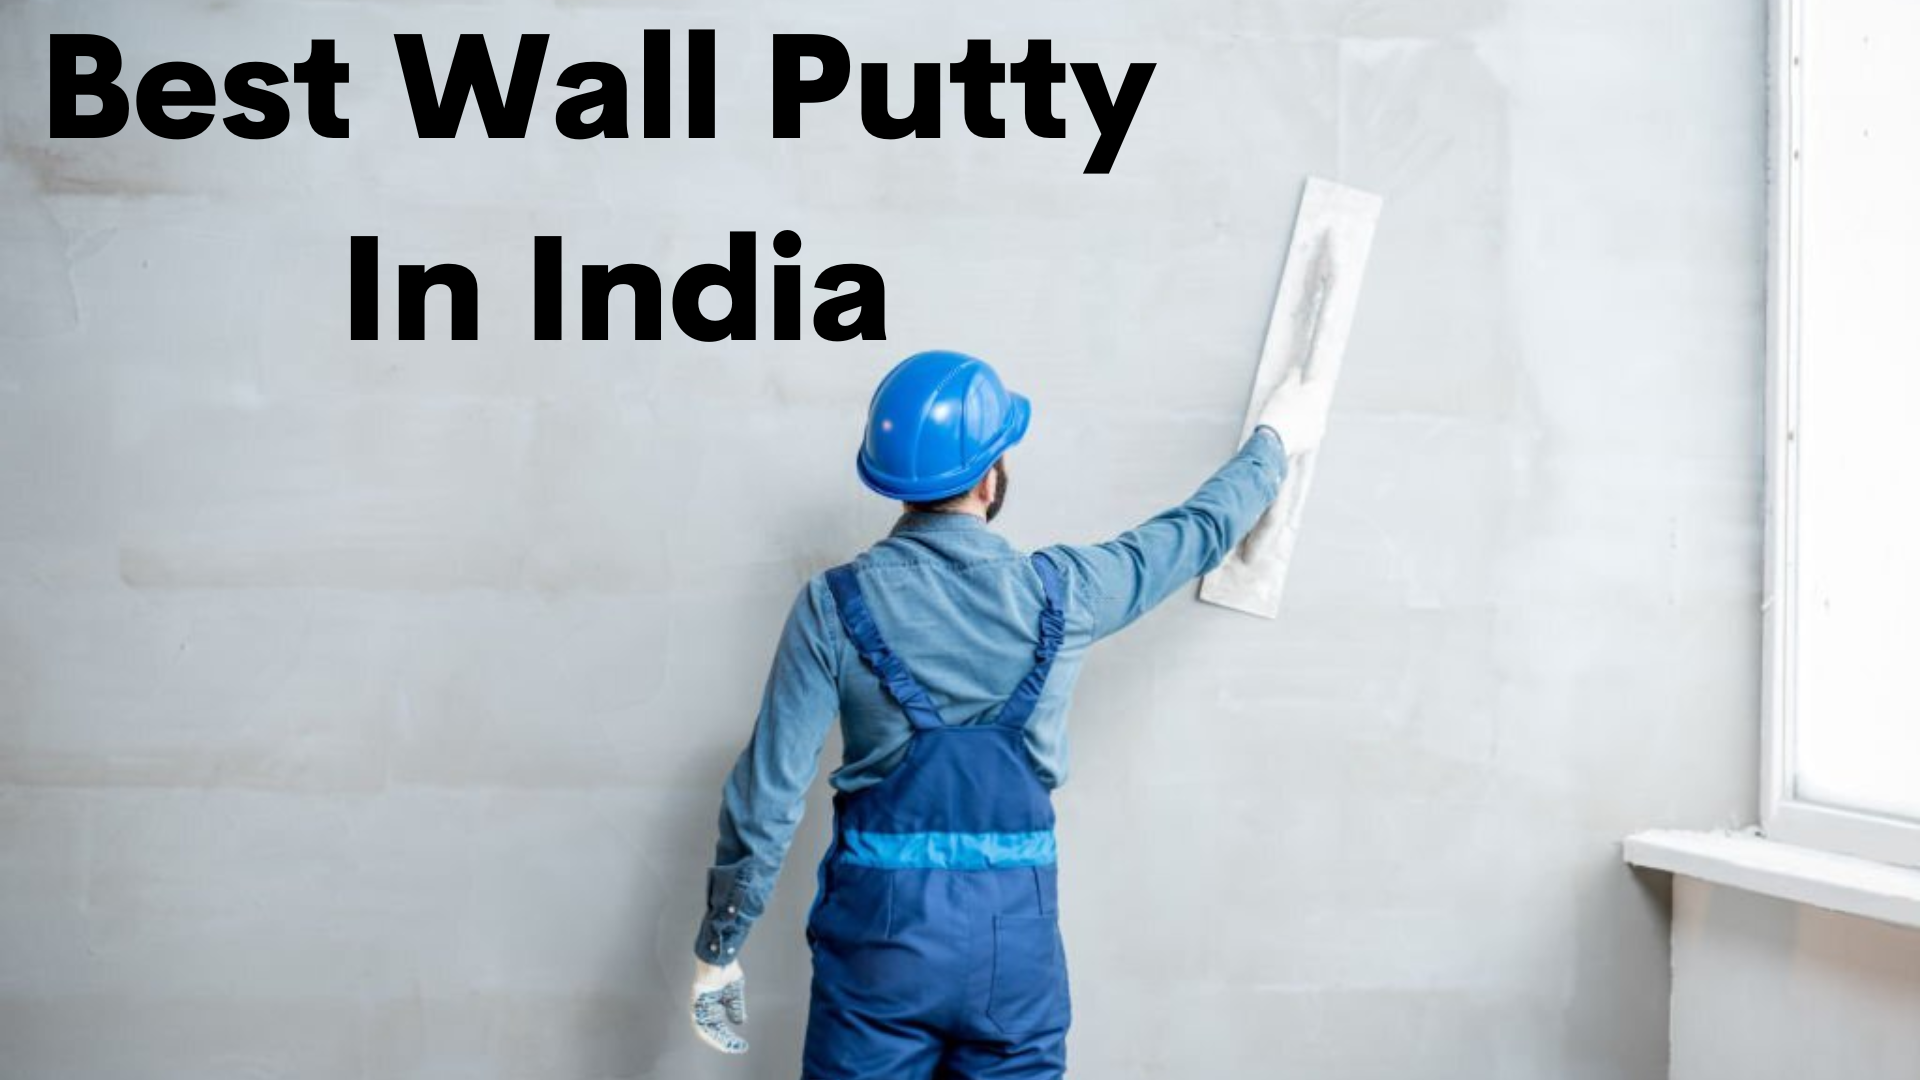 17 Best Wall Putty In India | Best Wall Putty Brands